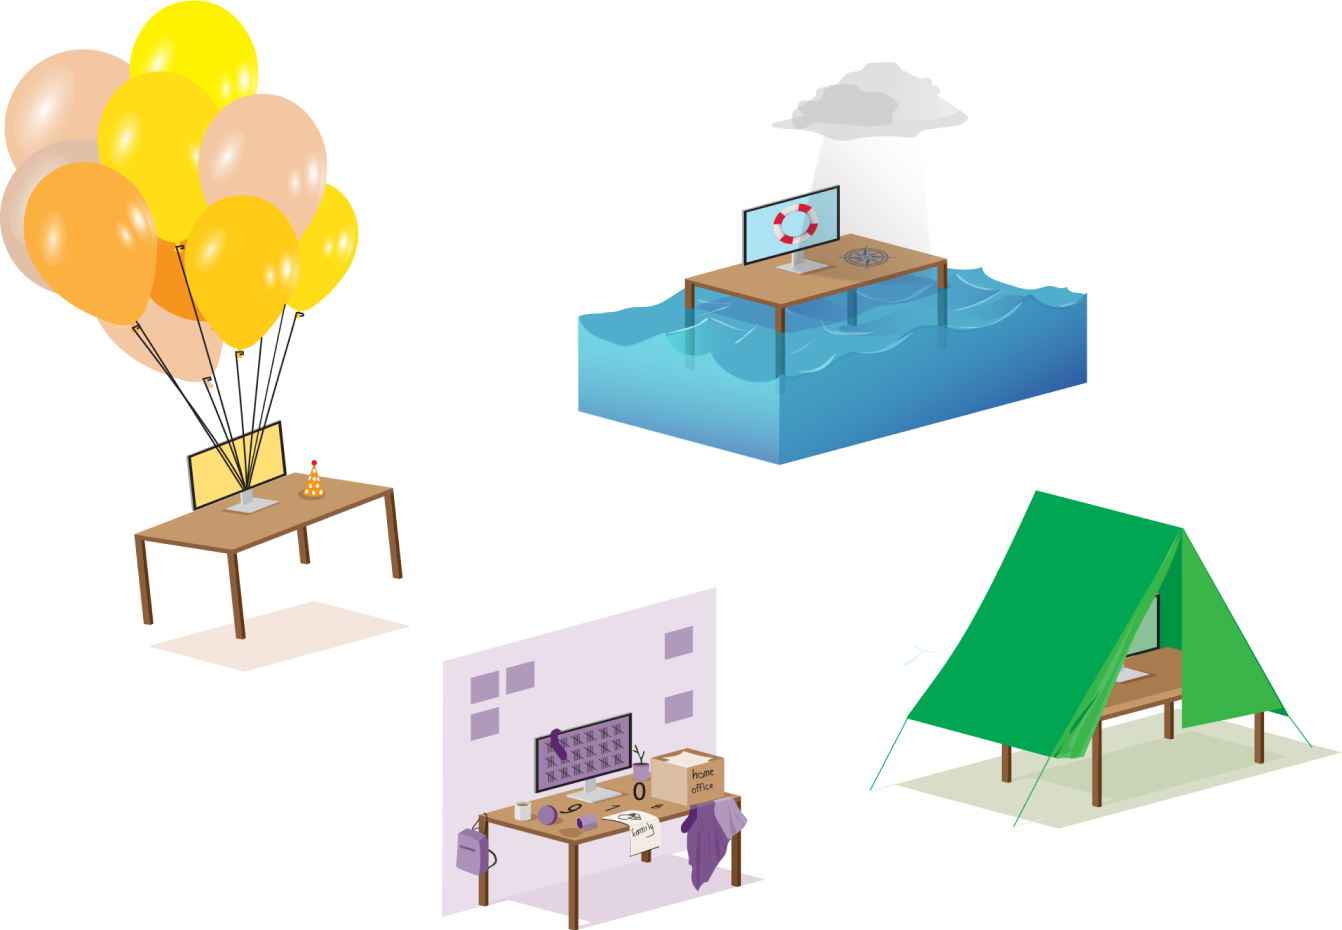 Desks in a range of settings- one with a tent over it, one in the ocean, one in an office and one with balloons attached